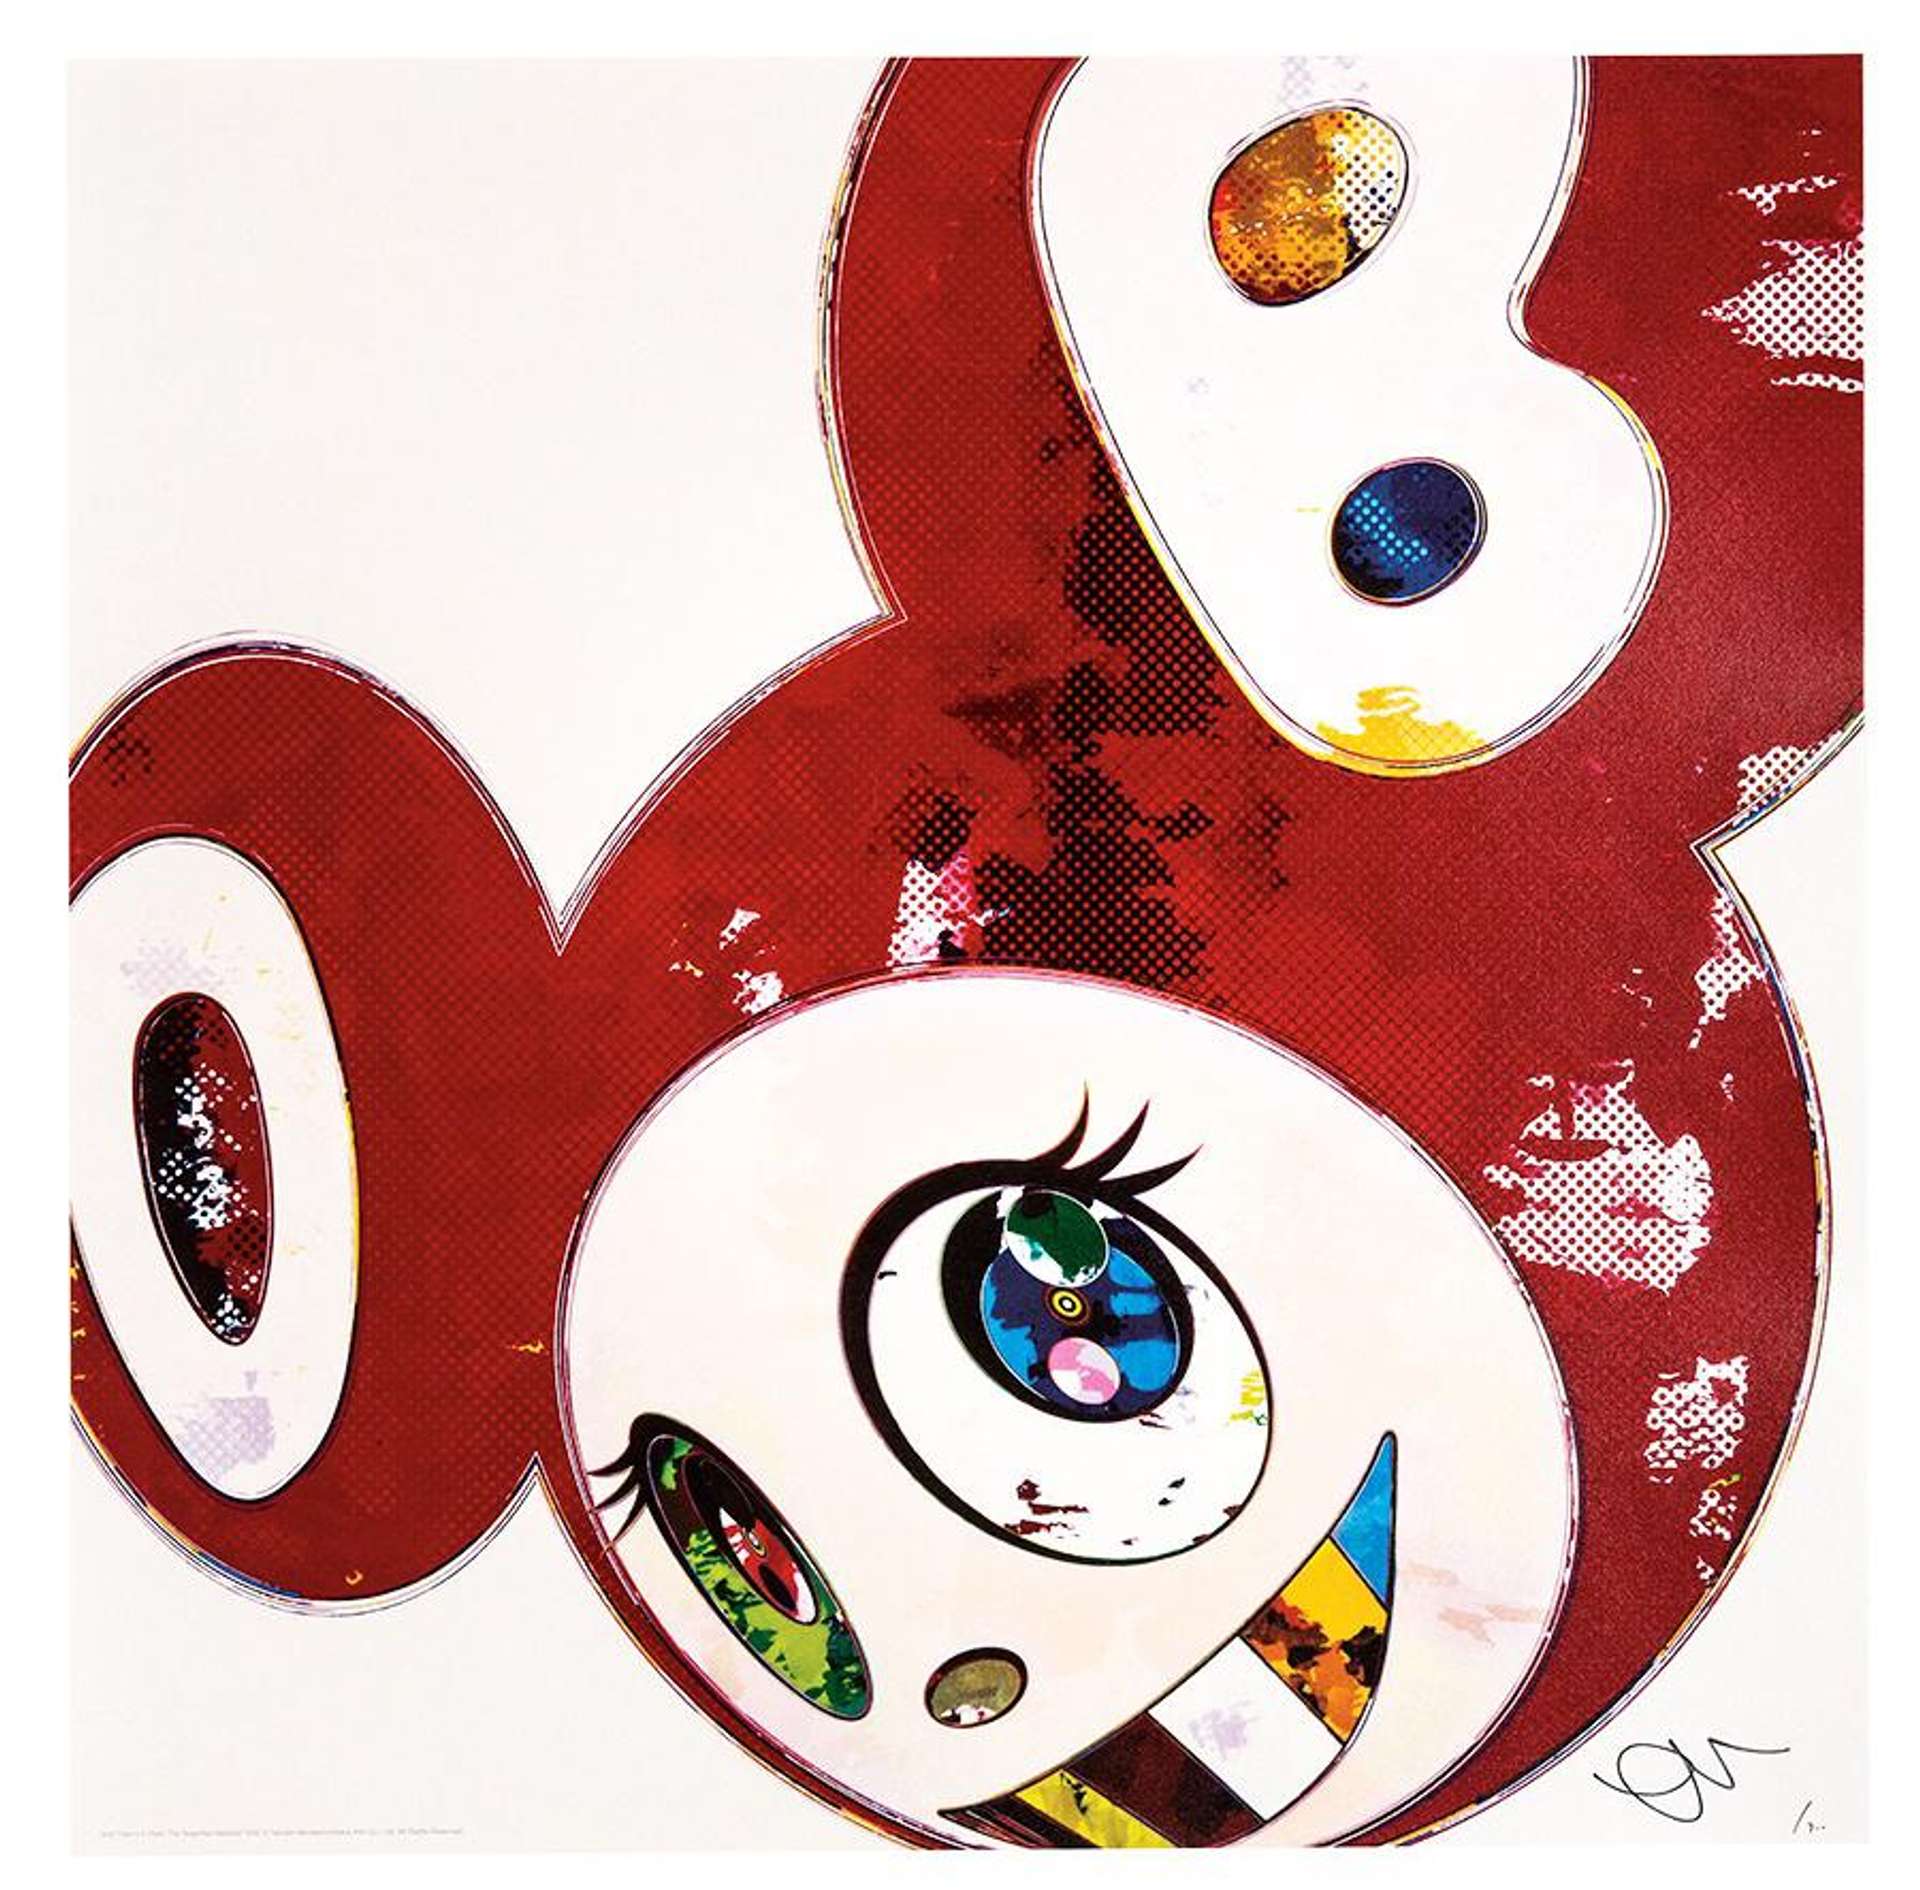 And Then The Superflat Method (red) - Signed Print by Takashi Murakami 2013 - MyArtBroker